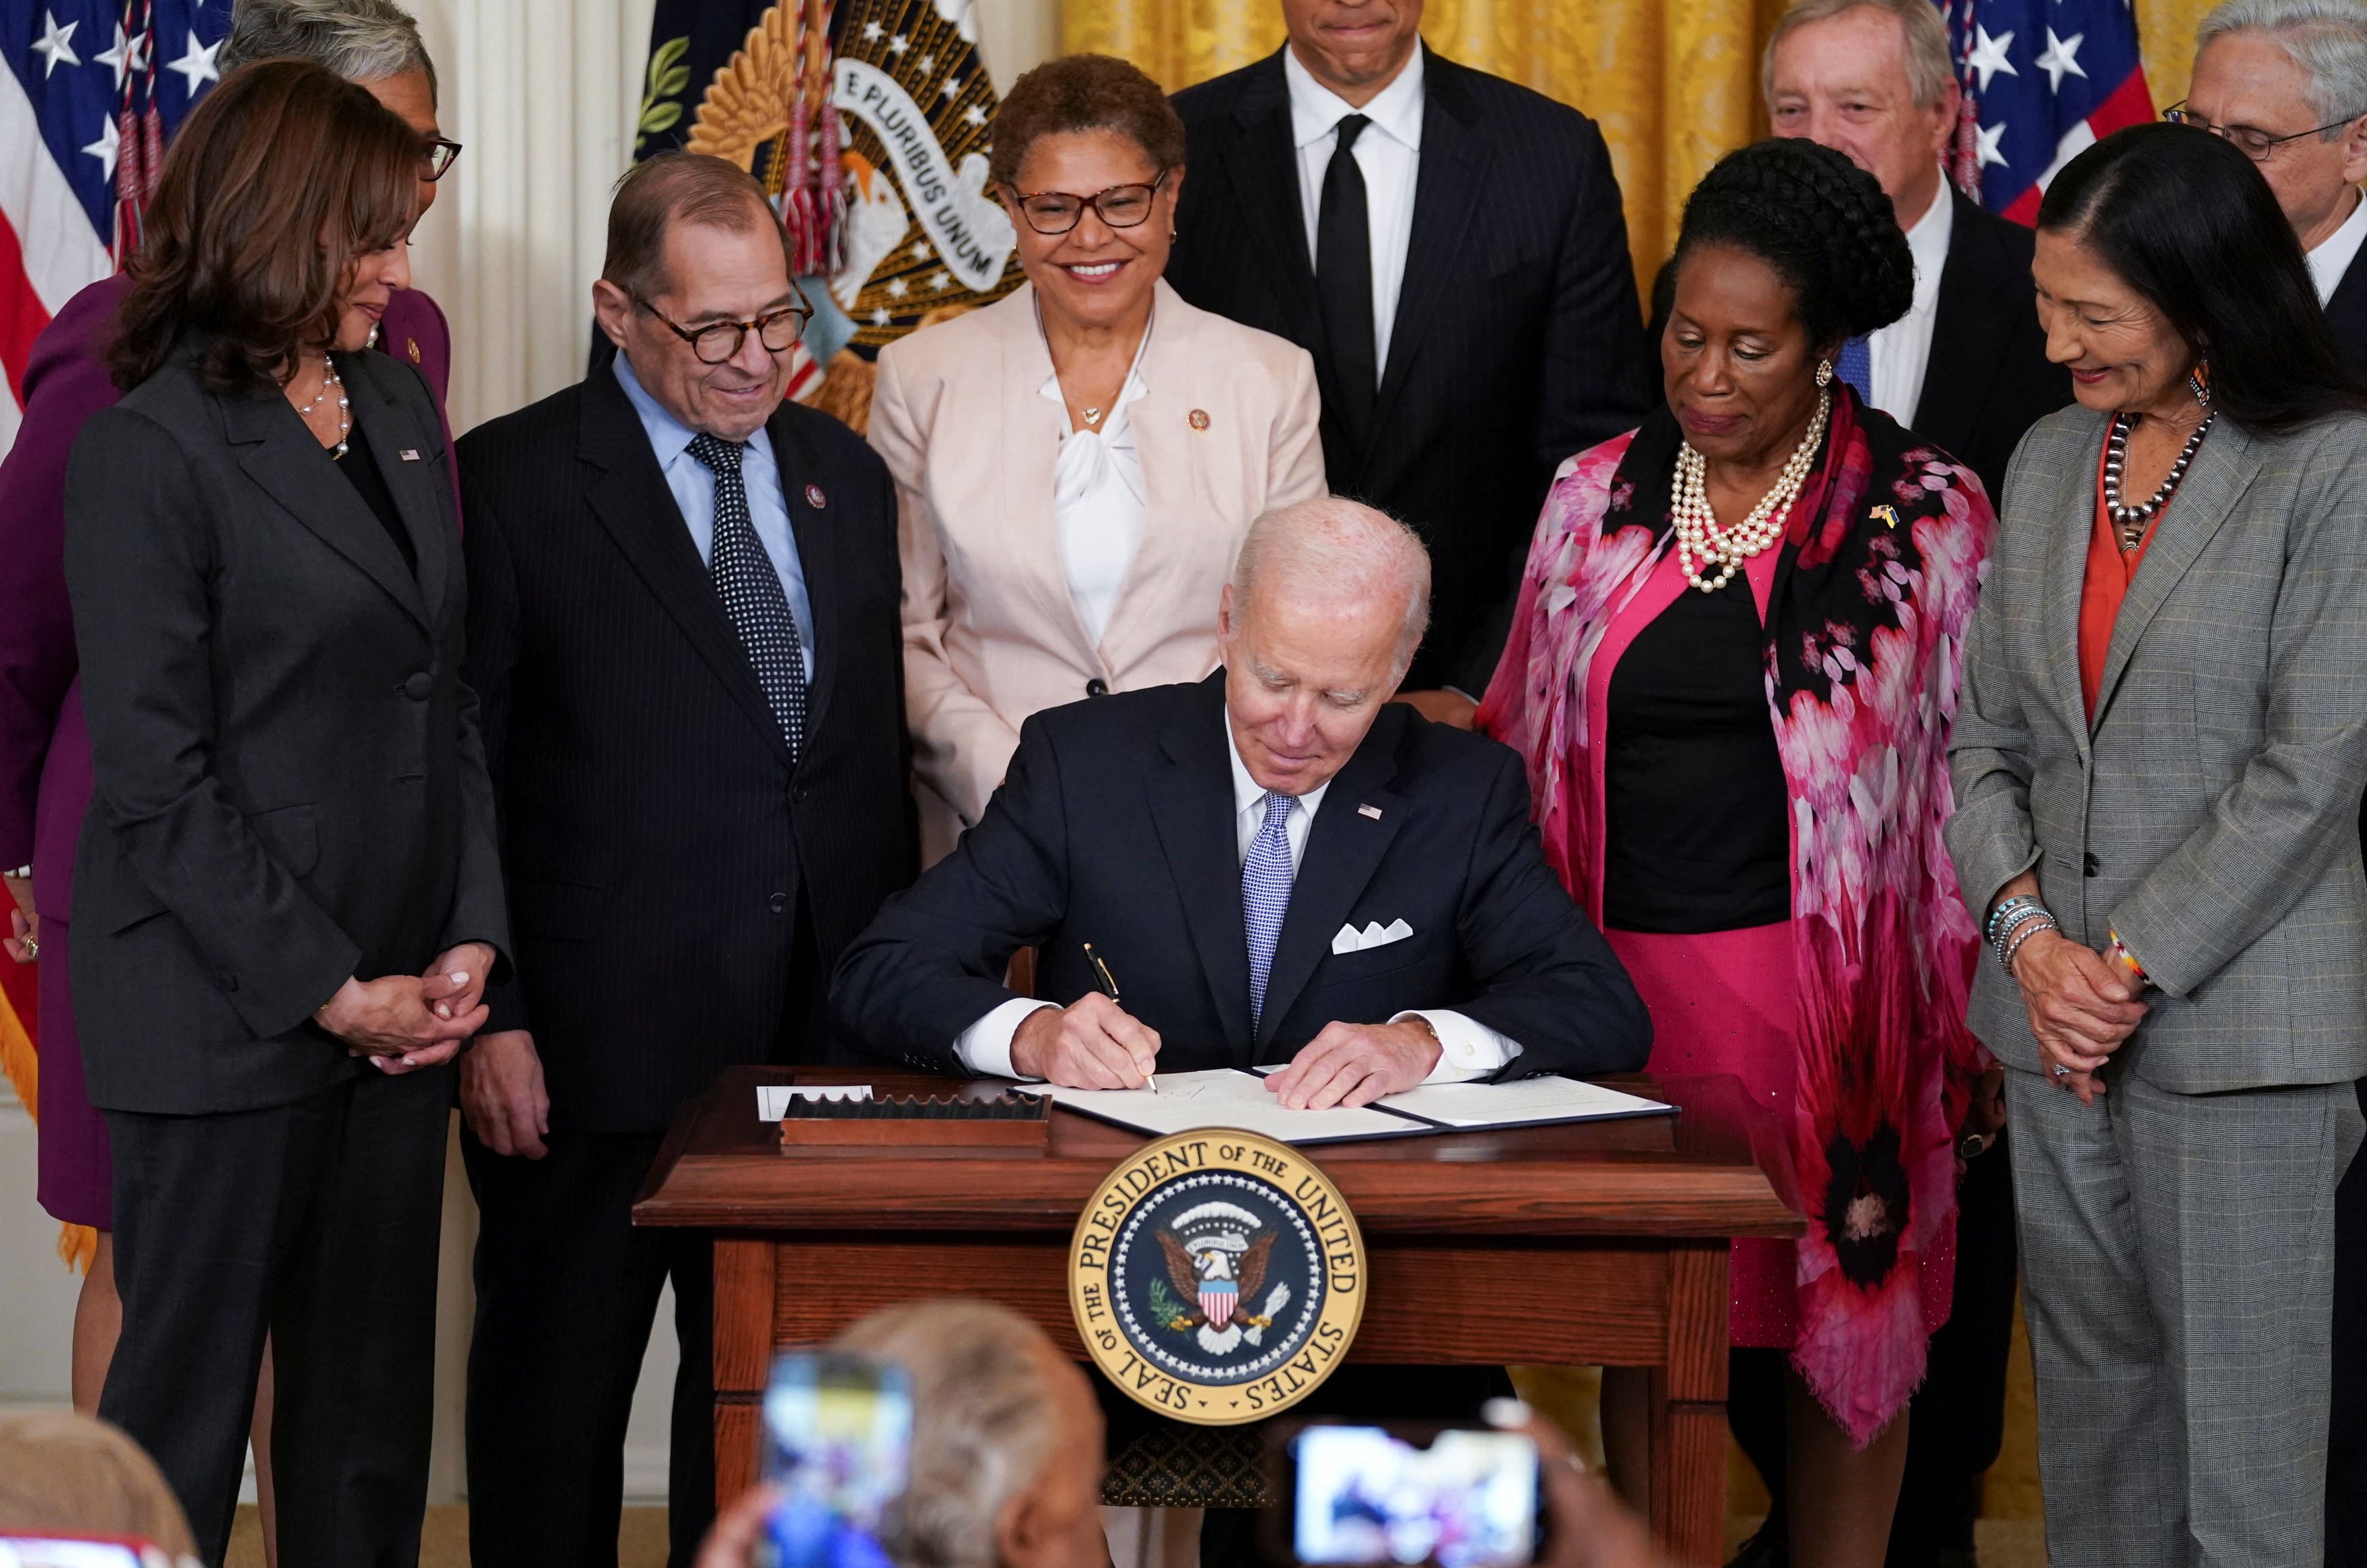 U.S. President Joe Biden signs an executive order to reform federal and local policing on the second anniversary of the death of George Floyd, in Washington